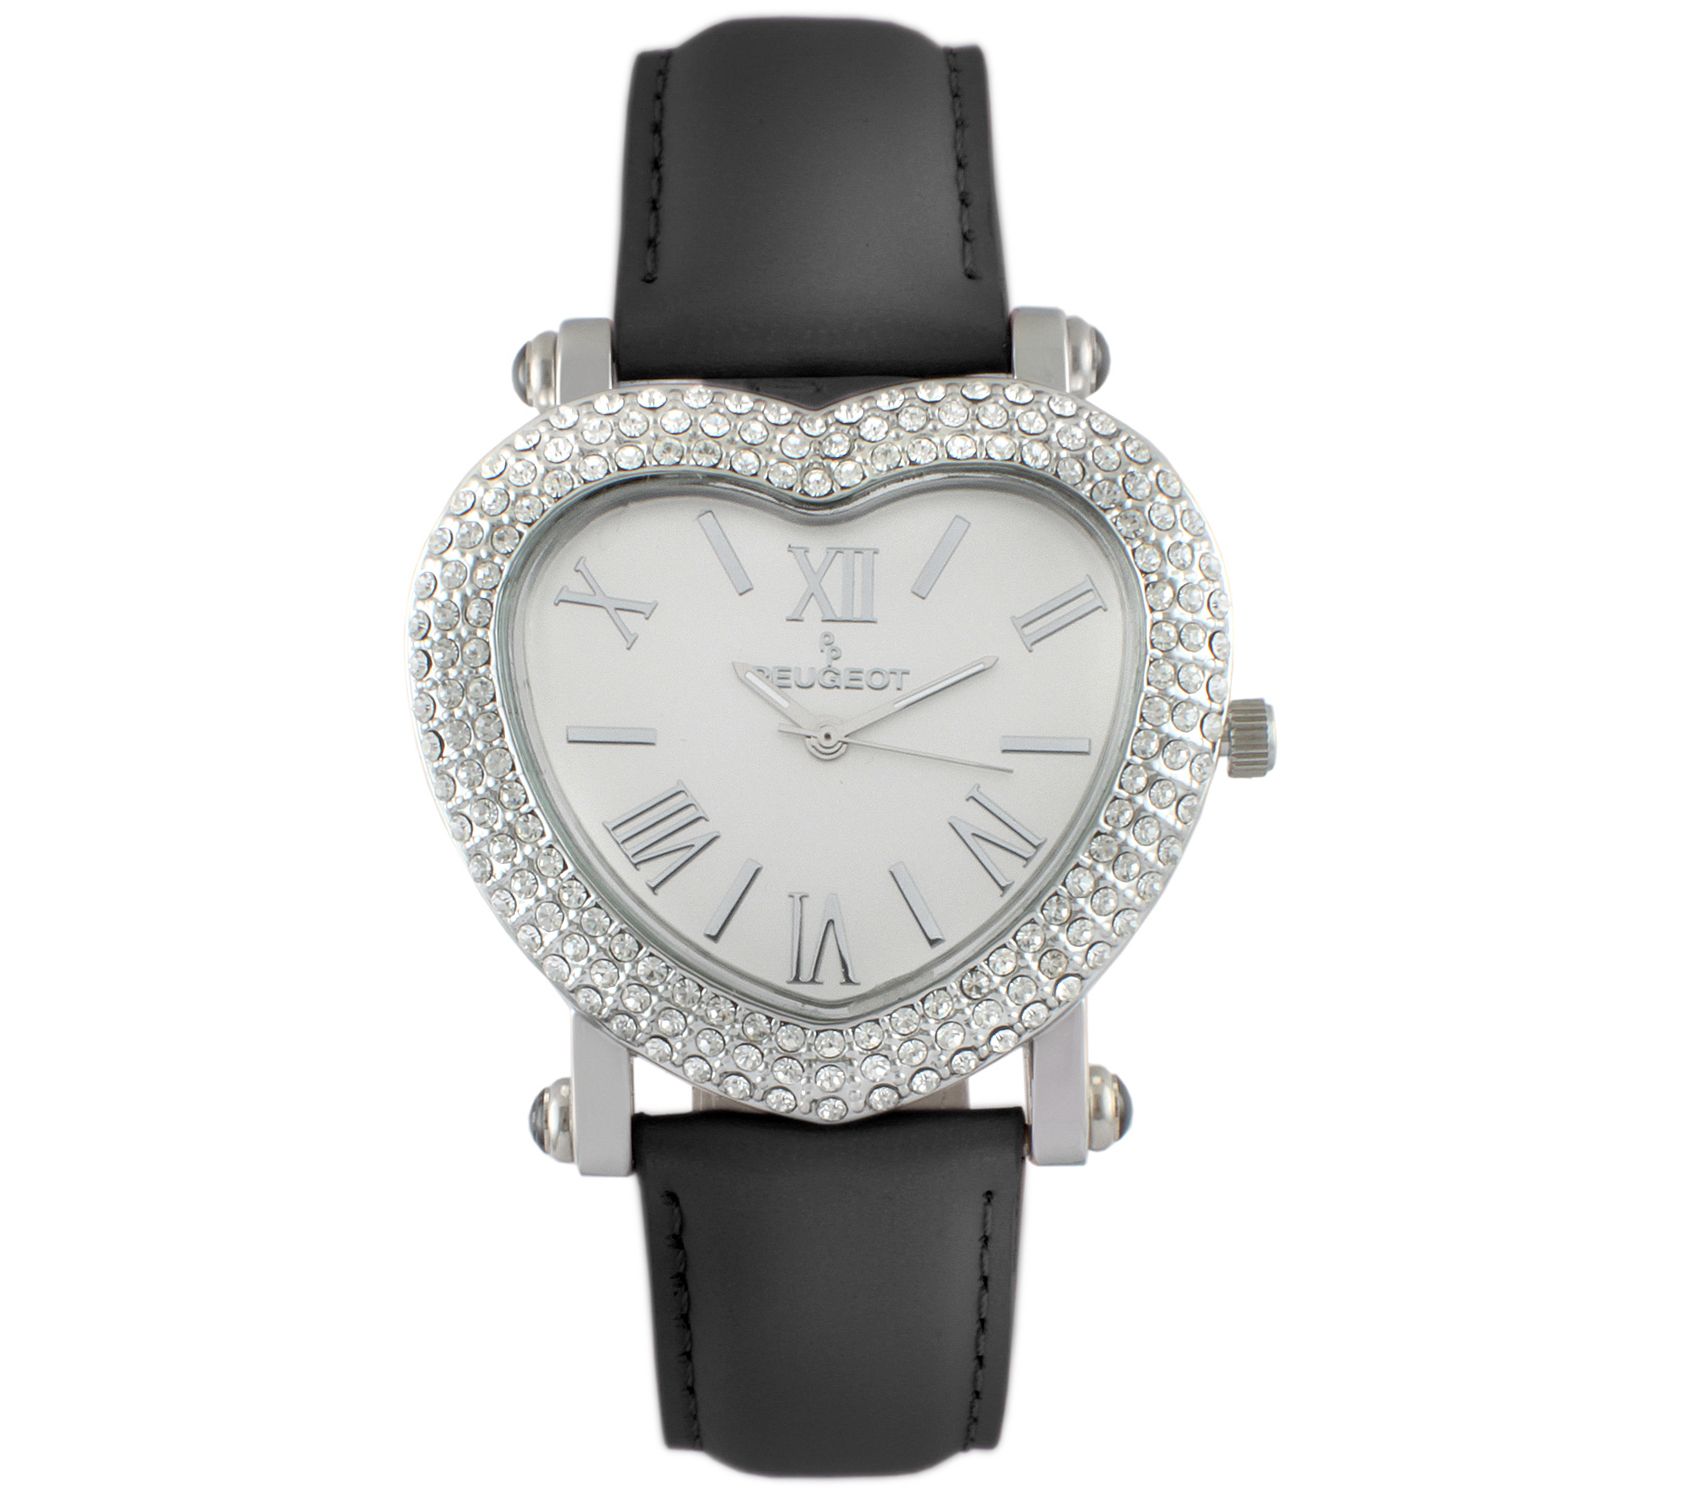 Peugeot Women's Stainless Heart-Shaped CrystalLeather Watch - QVC.com